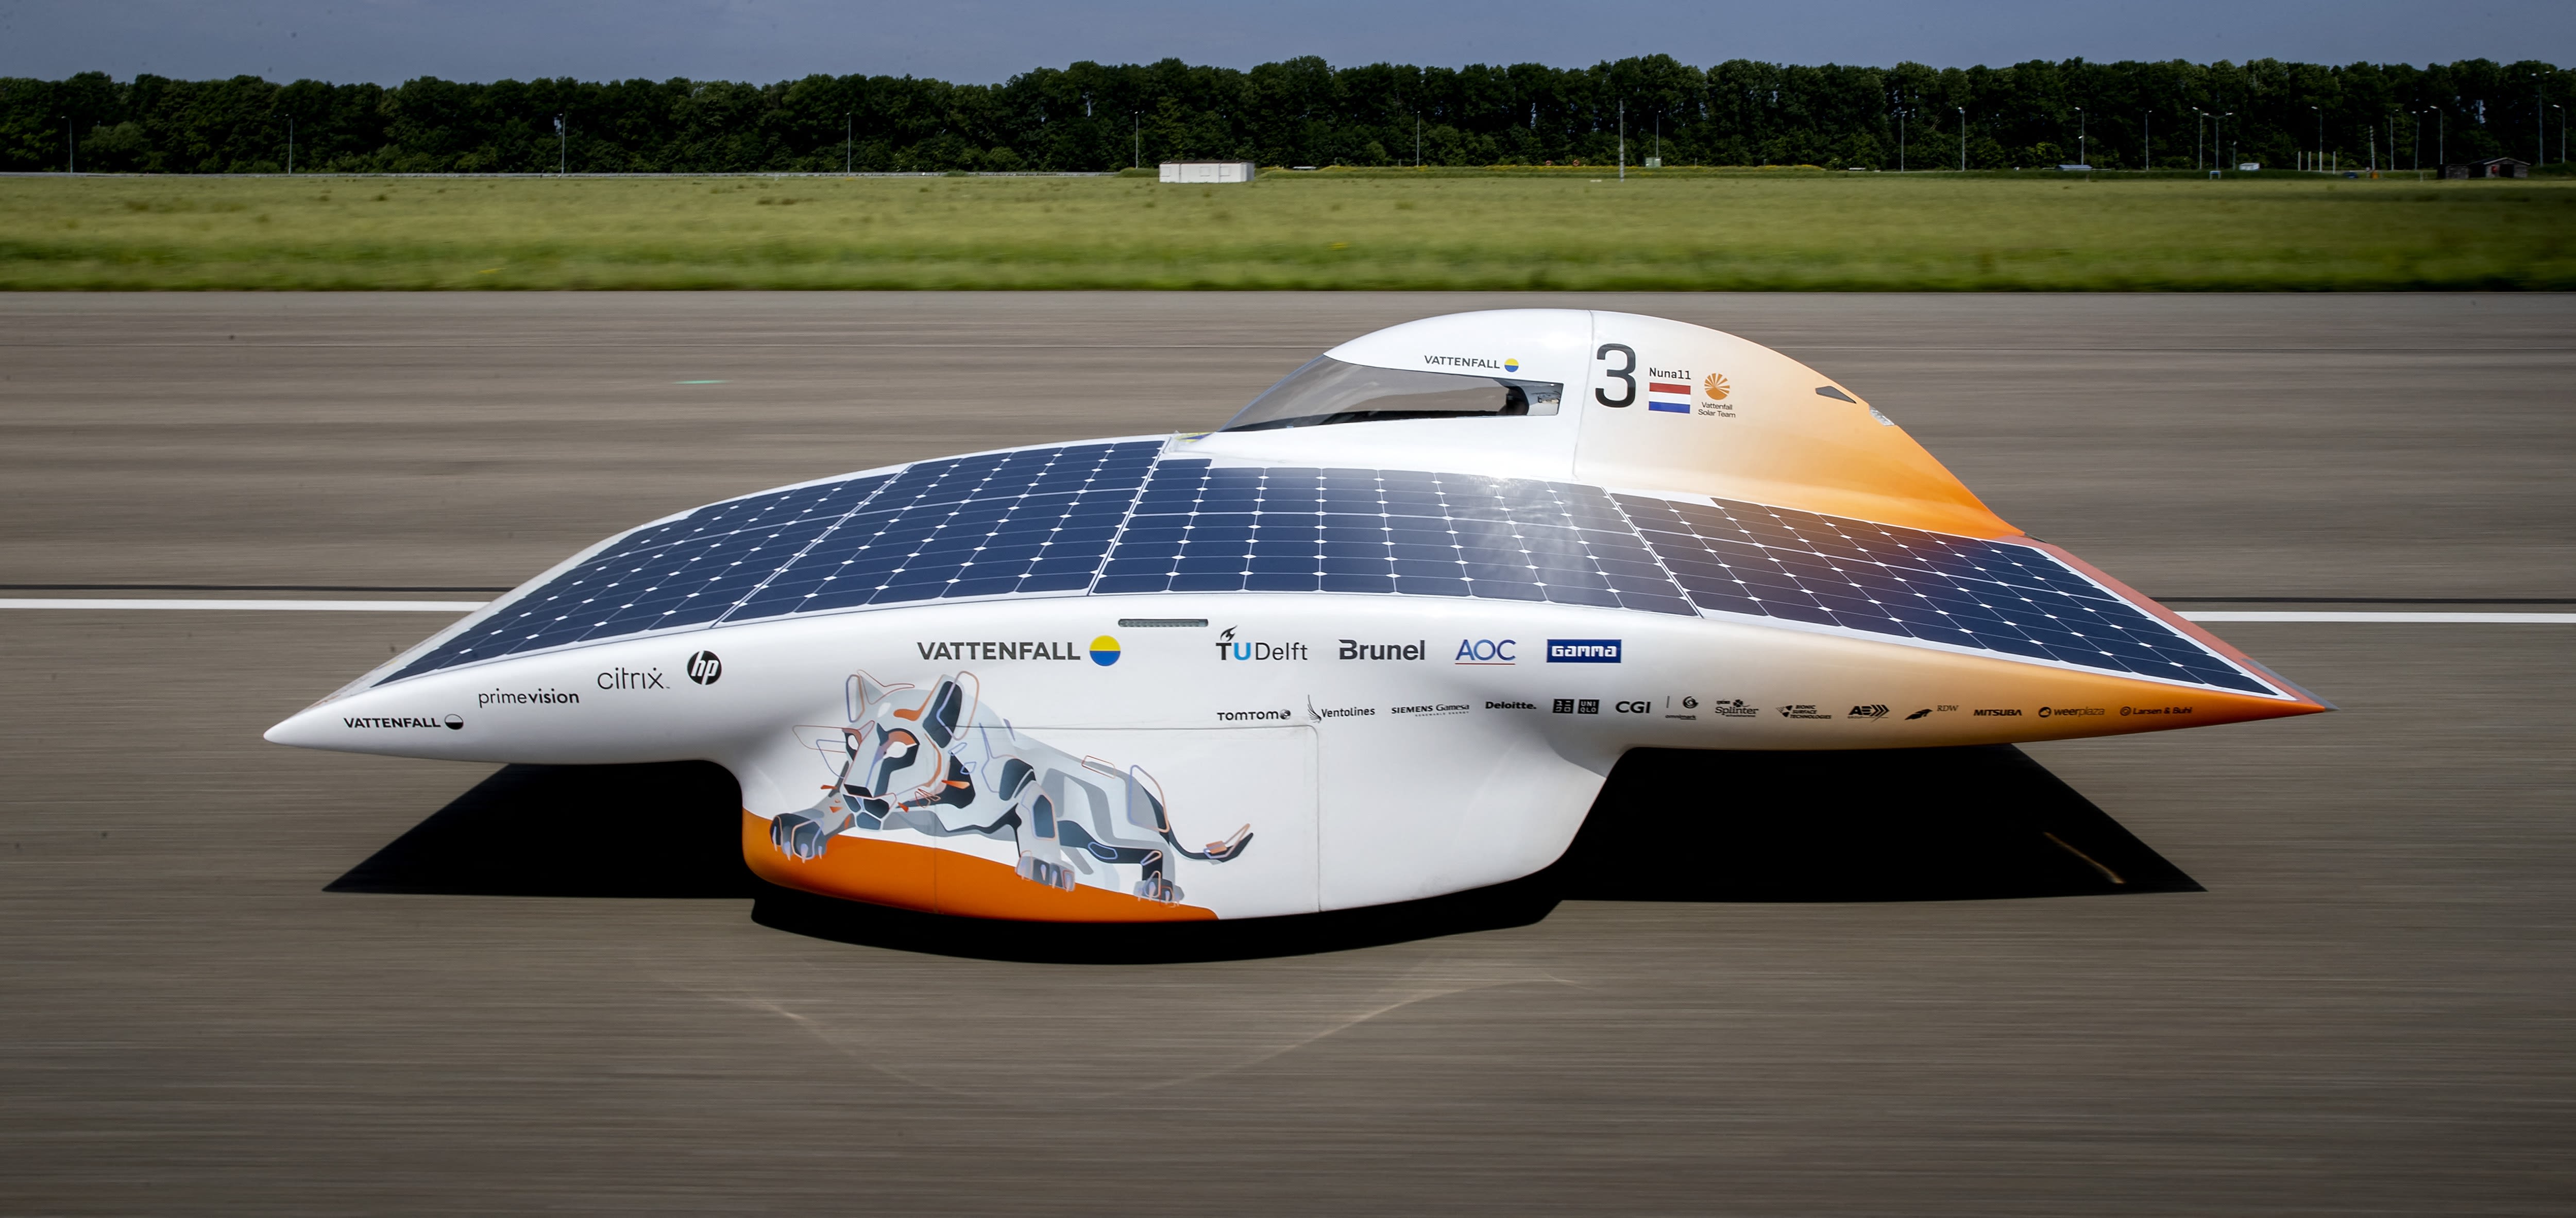 Every two years, solar-powered vehicles race at the World Solar Challenge event -- and the competition has inspired some innovative designs. Last year, Vattenfall Solar Team, made up of students from Delft University, in the Netherlands, finished third at Solar Challenge Morocco with a solar-powered car called Nuna 11. The unusual vehicle has three-wheels -- two on the right and one on the left. 